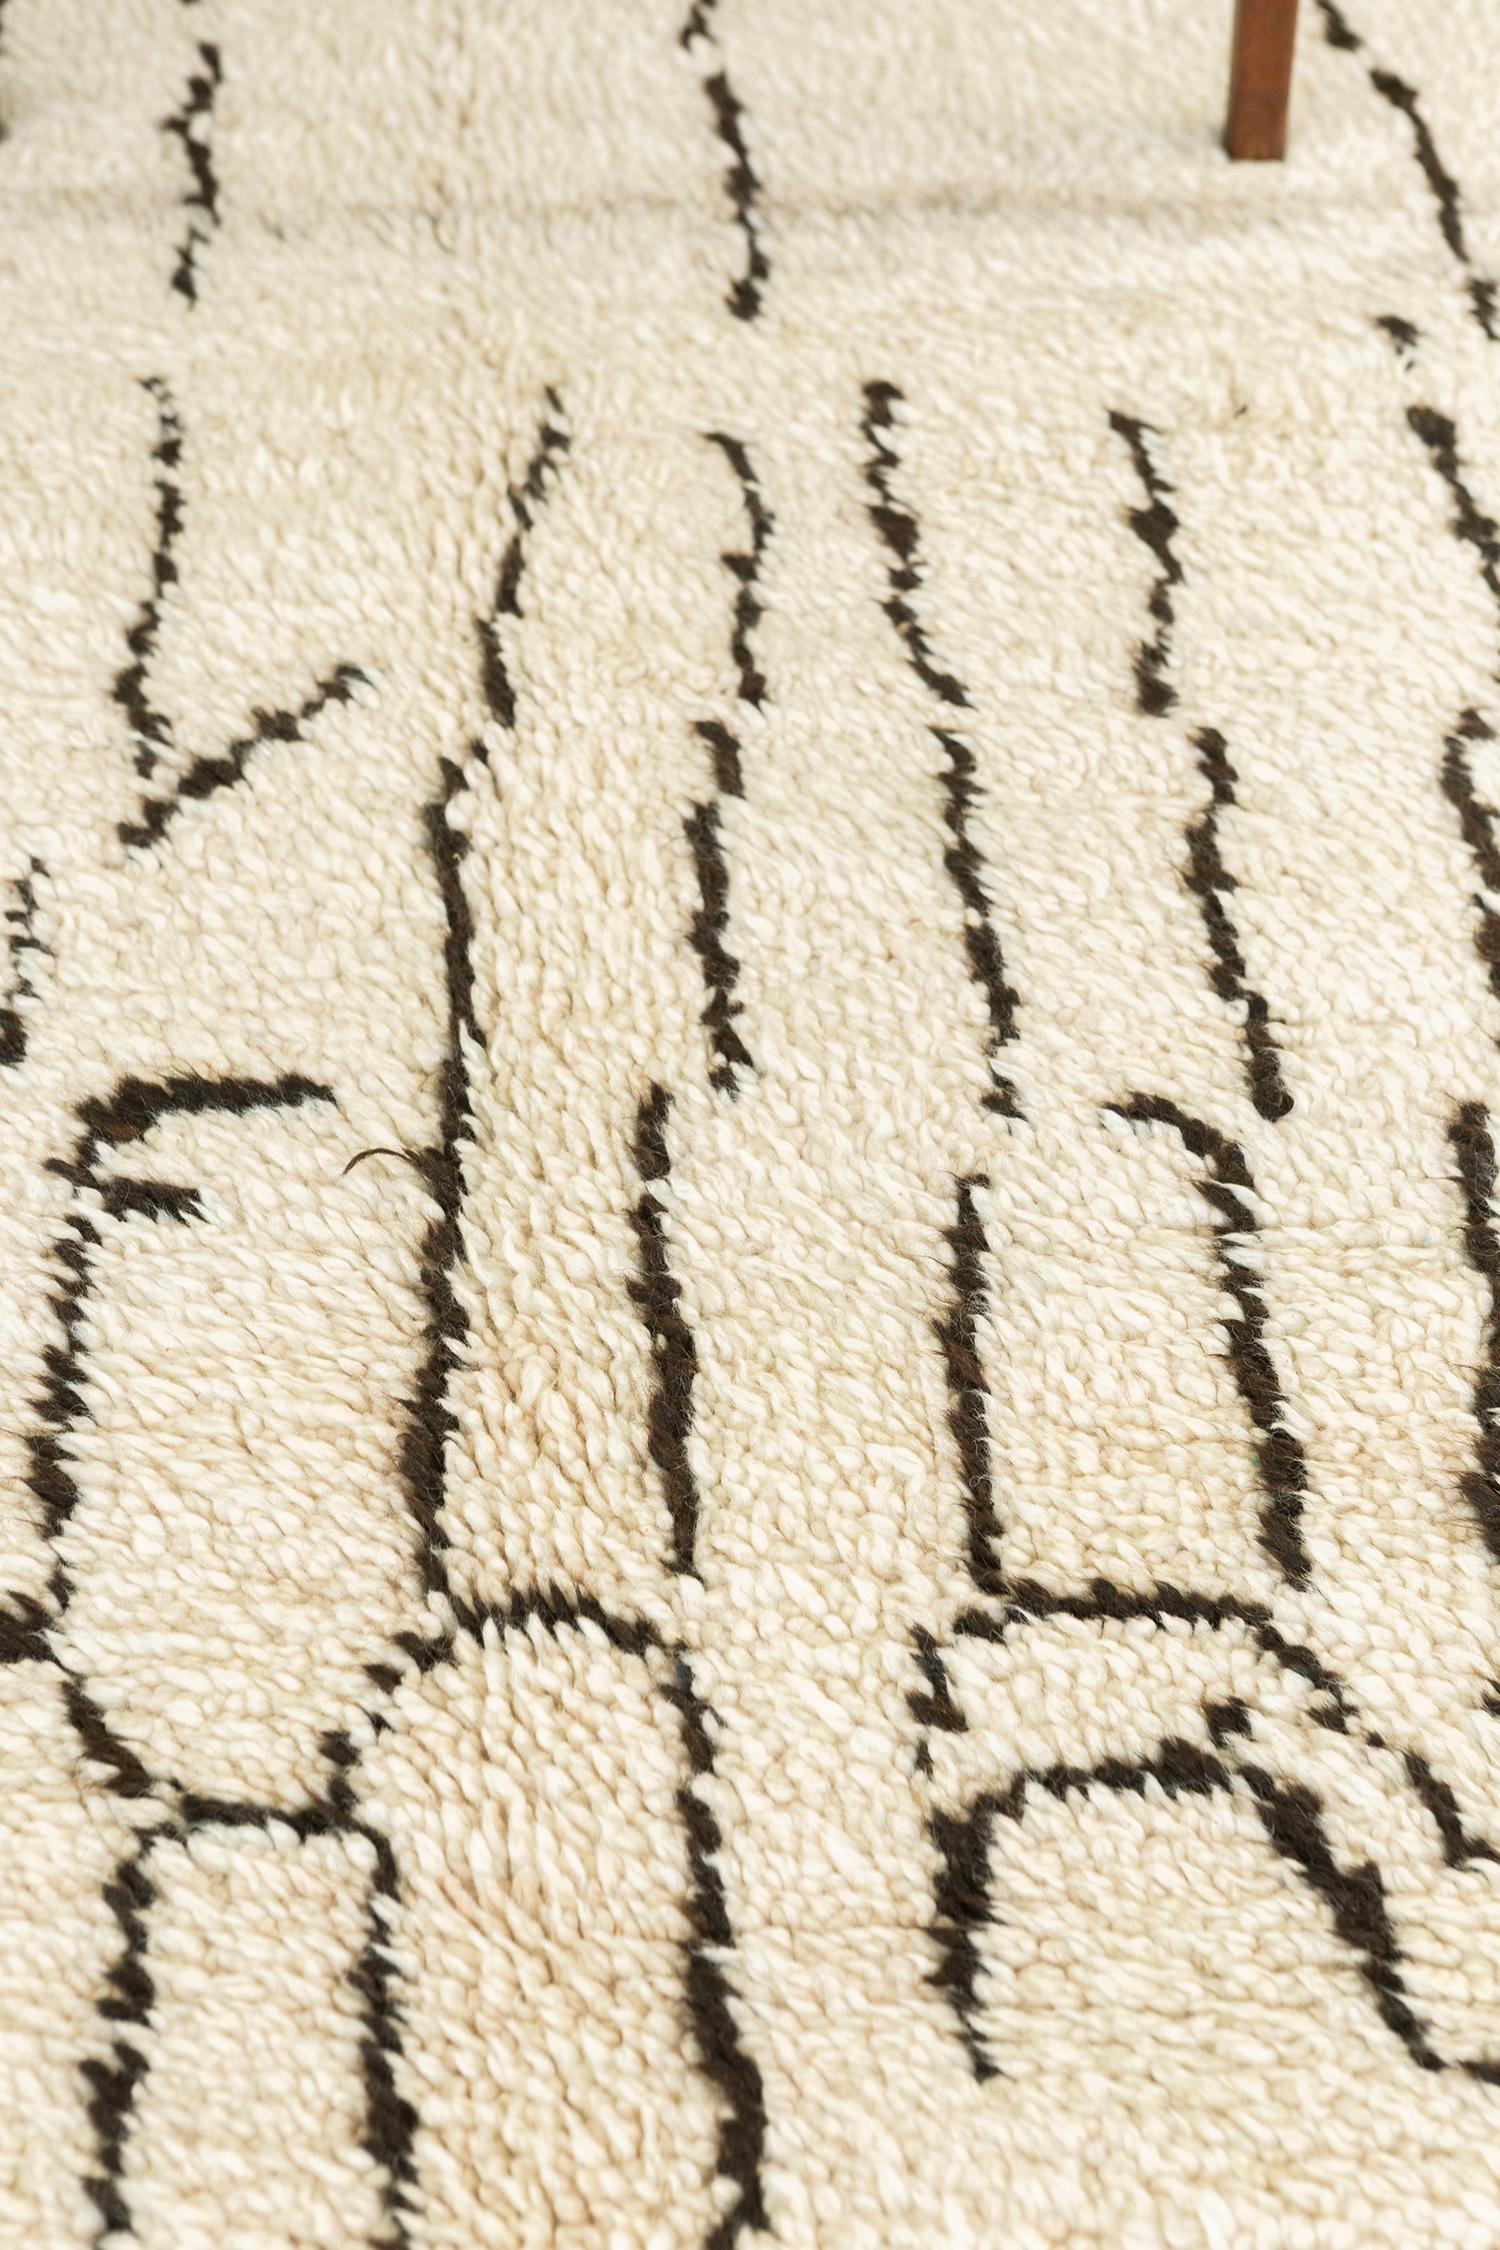 Fancify your room with our vintage Azilal Tribe Moroccan rug from Atlas Collection. It consists of hazel-outlined ambiguous Berber symbols in an off-white field that makes the rug more unique. A centerpiece that will perfectly beautify your